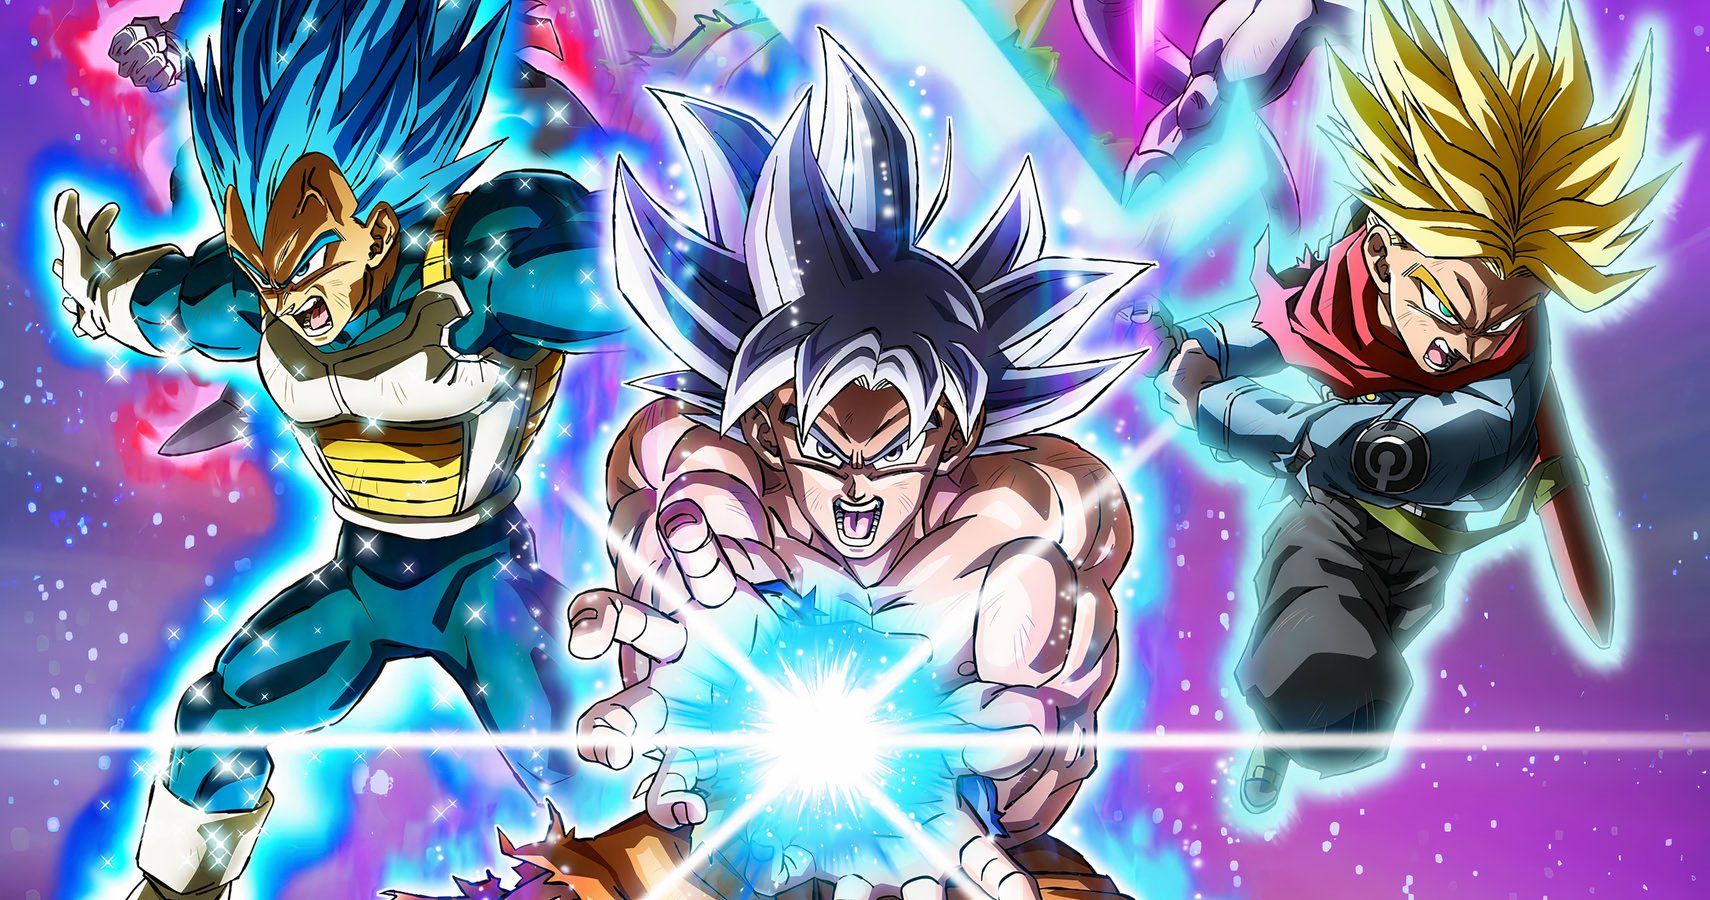 Sparking! ZERO's New Mode is Going to Make it the Best Dragon Ball Game Ever